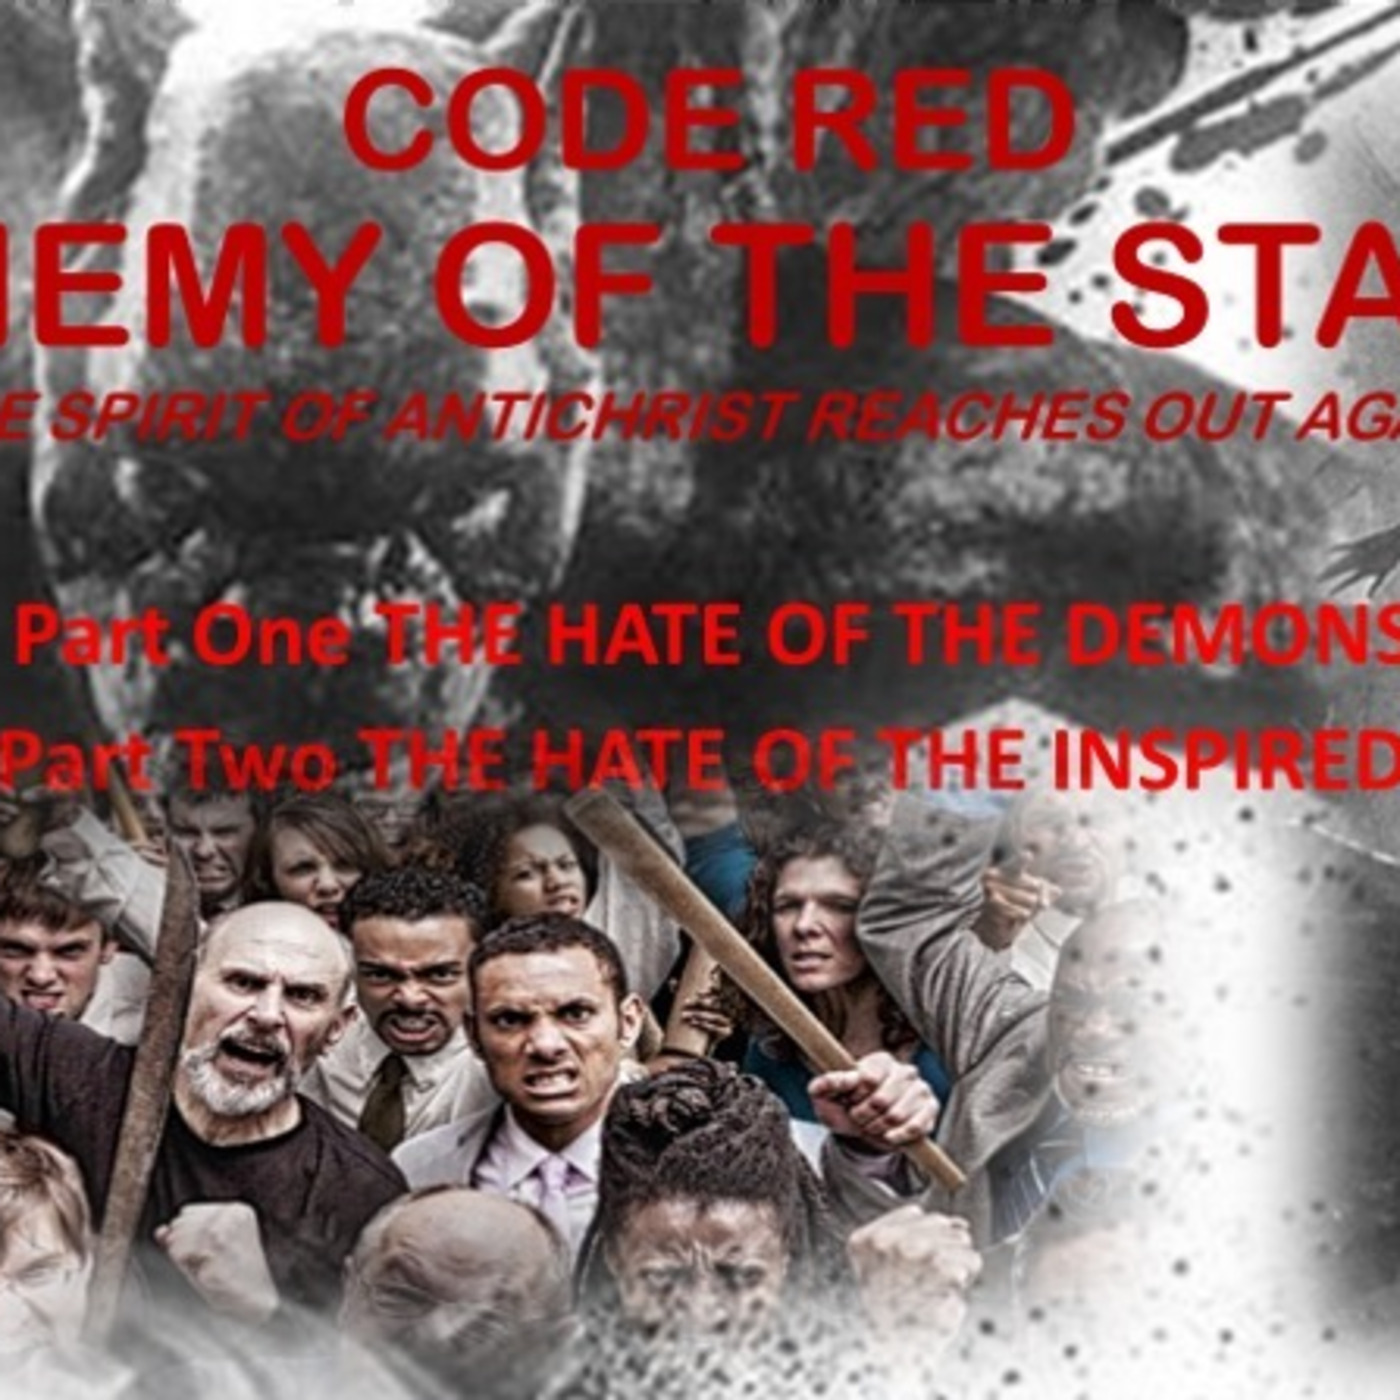 Episode 1635: CODE ENEMY OF THE STATE DEMON INSPIRED RAGE  PART 2